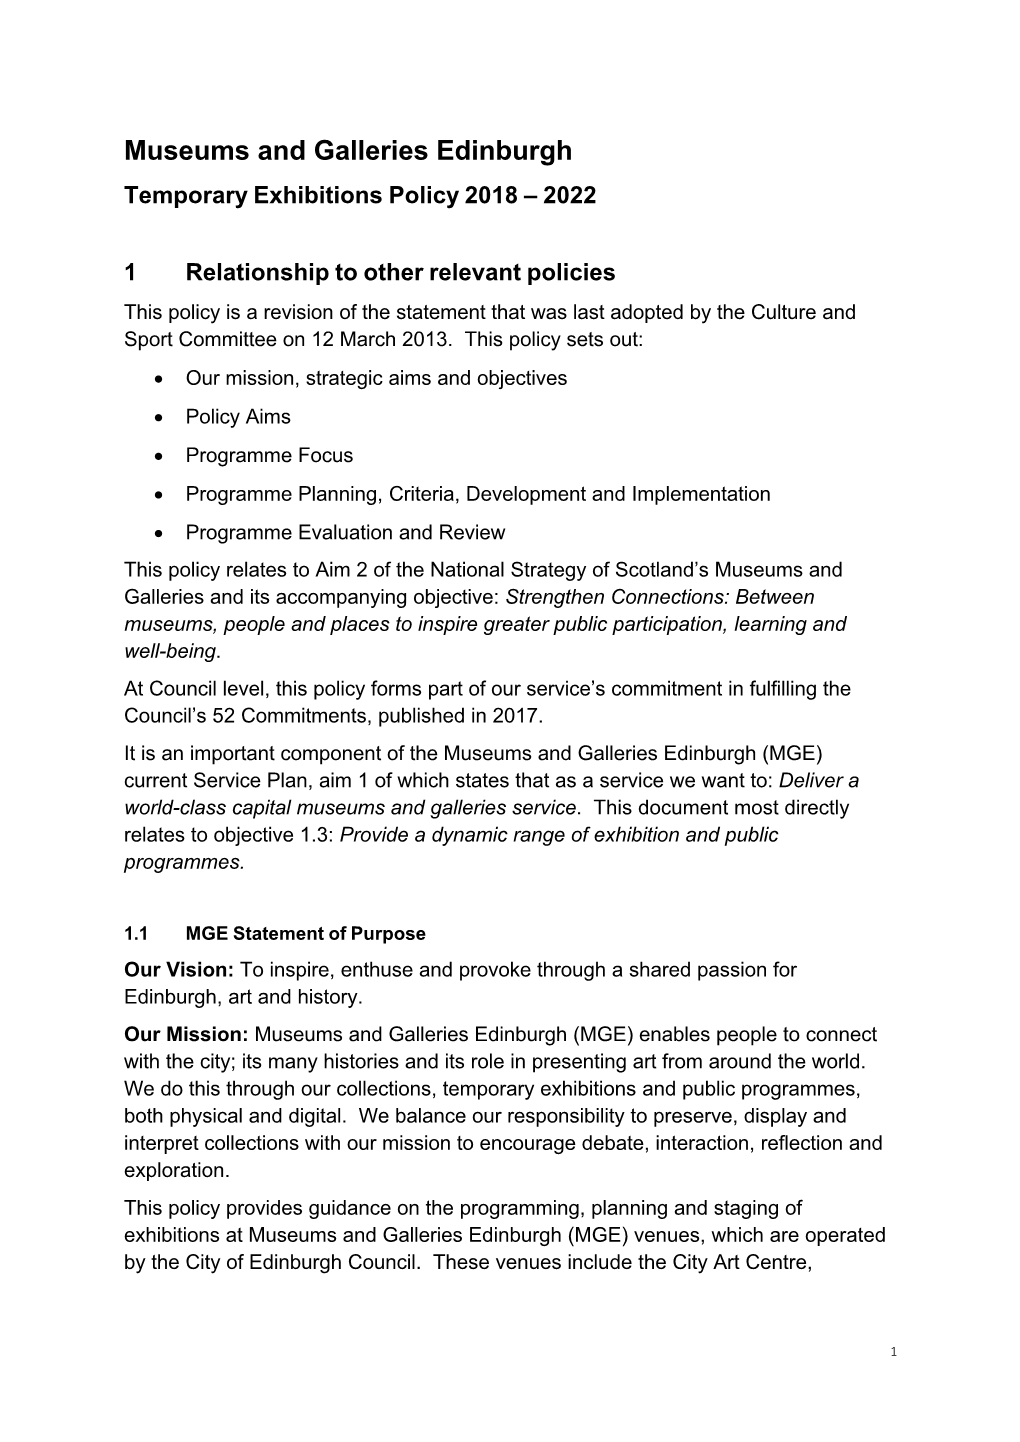 Museums and Galleries Edinburgh Temporary Exhibitions Policy.Docx